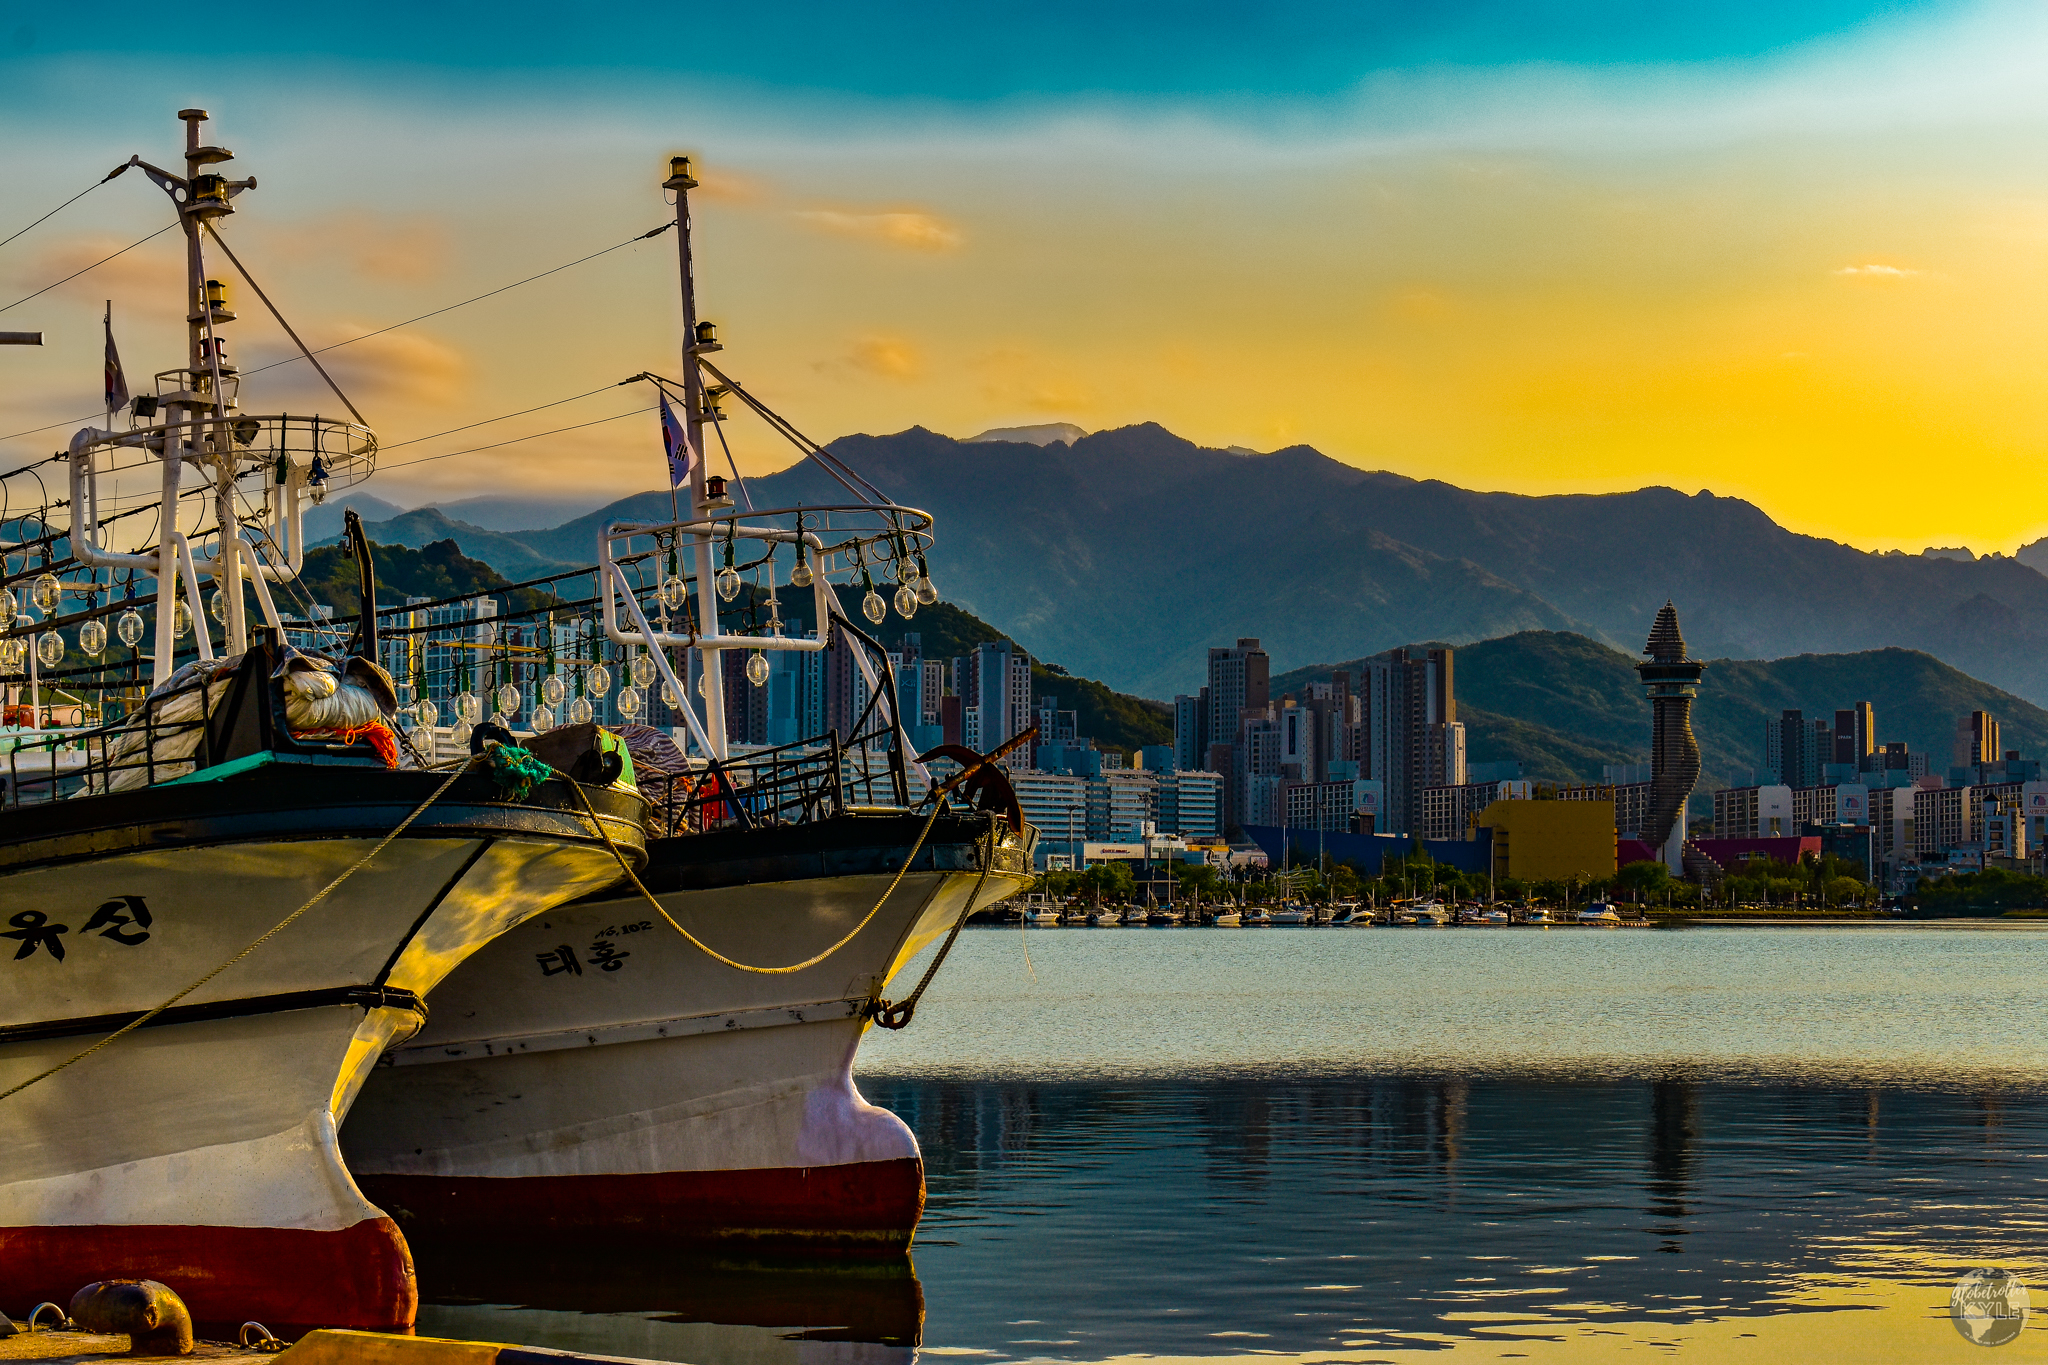 Two boats at rest in the Cheongcho Lake harbor in front of a cityscape below a yellow and orange sky made from the sun setting behind a mountain range